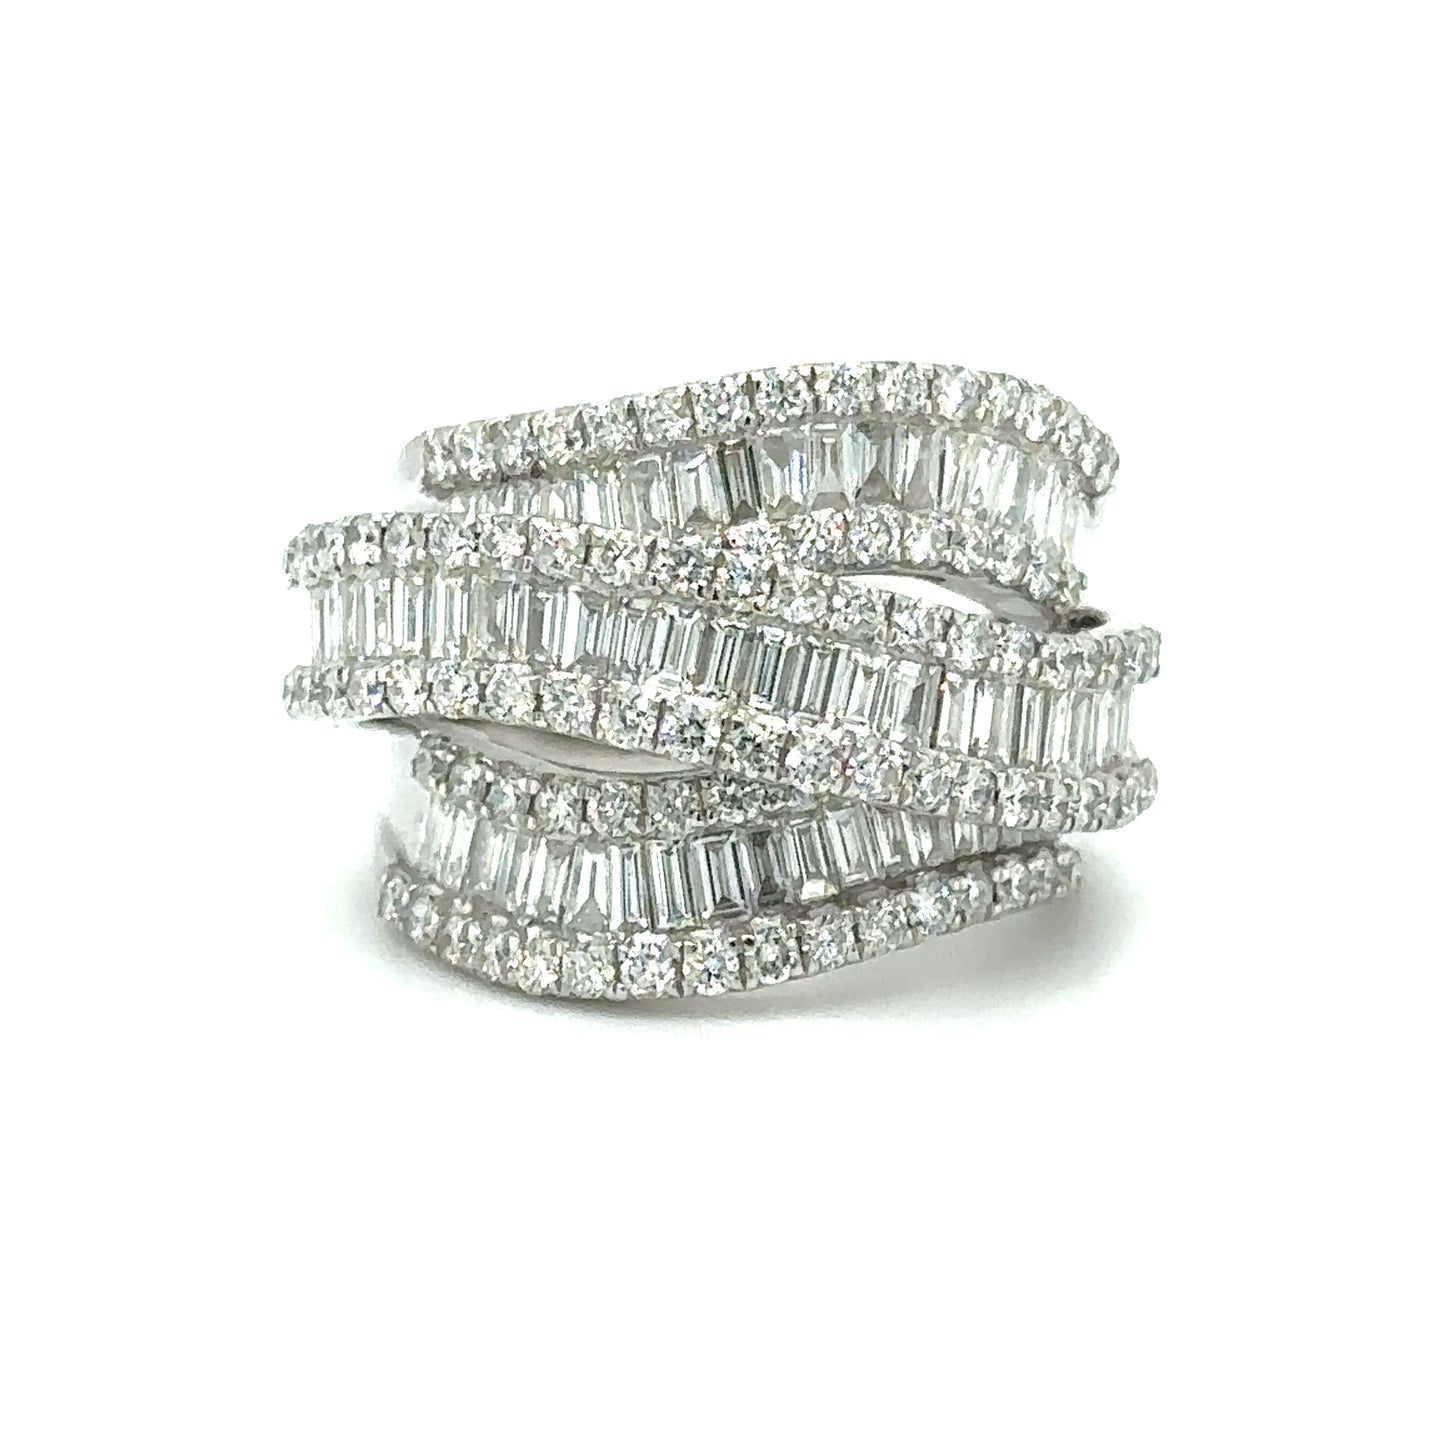 6.0 CTW Diamond Overlapping Multi Row Cocktail Ring in 18K White Gold